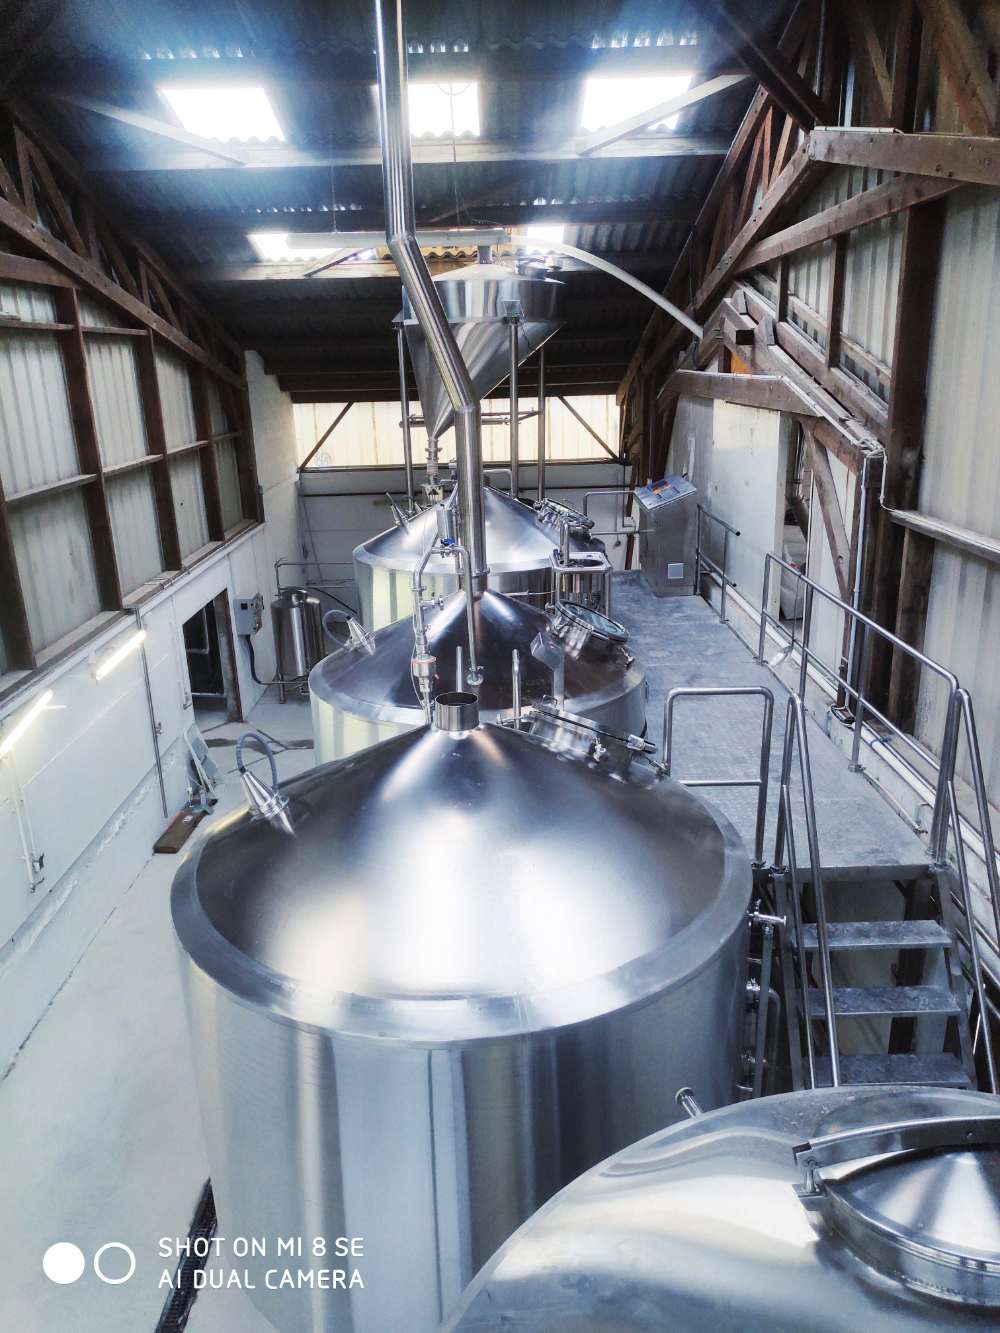 brewery beer brewing equipments,conical stainless steel beer fermenter,commercial brewery equipments for sale,how to start brewery,brewery equipment cost,beer fermentation tank,beer bottling machine,beer kegging machine,beer canning machine,craft beer brewing system for sale,brewery tanks,beer brewing equipment,brewery France,30HLbrewery equipment,automatic brewery system